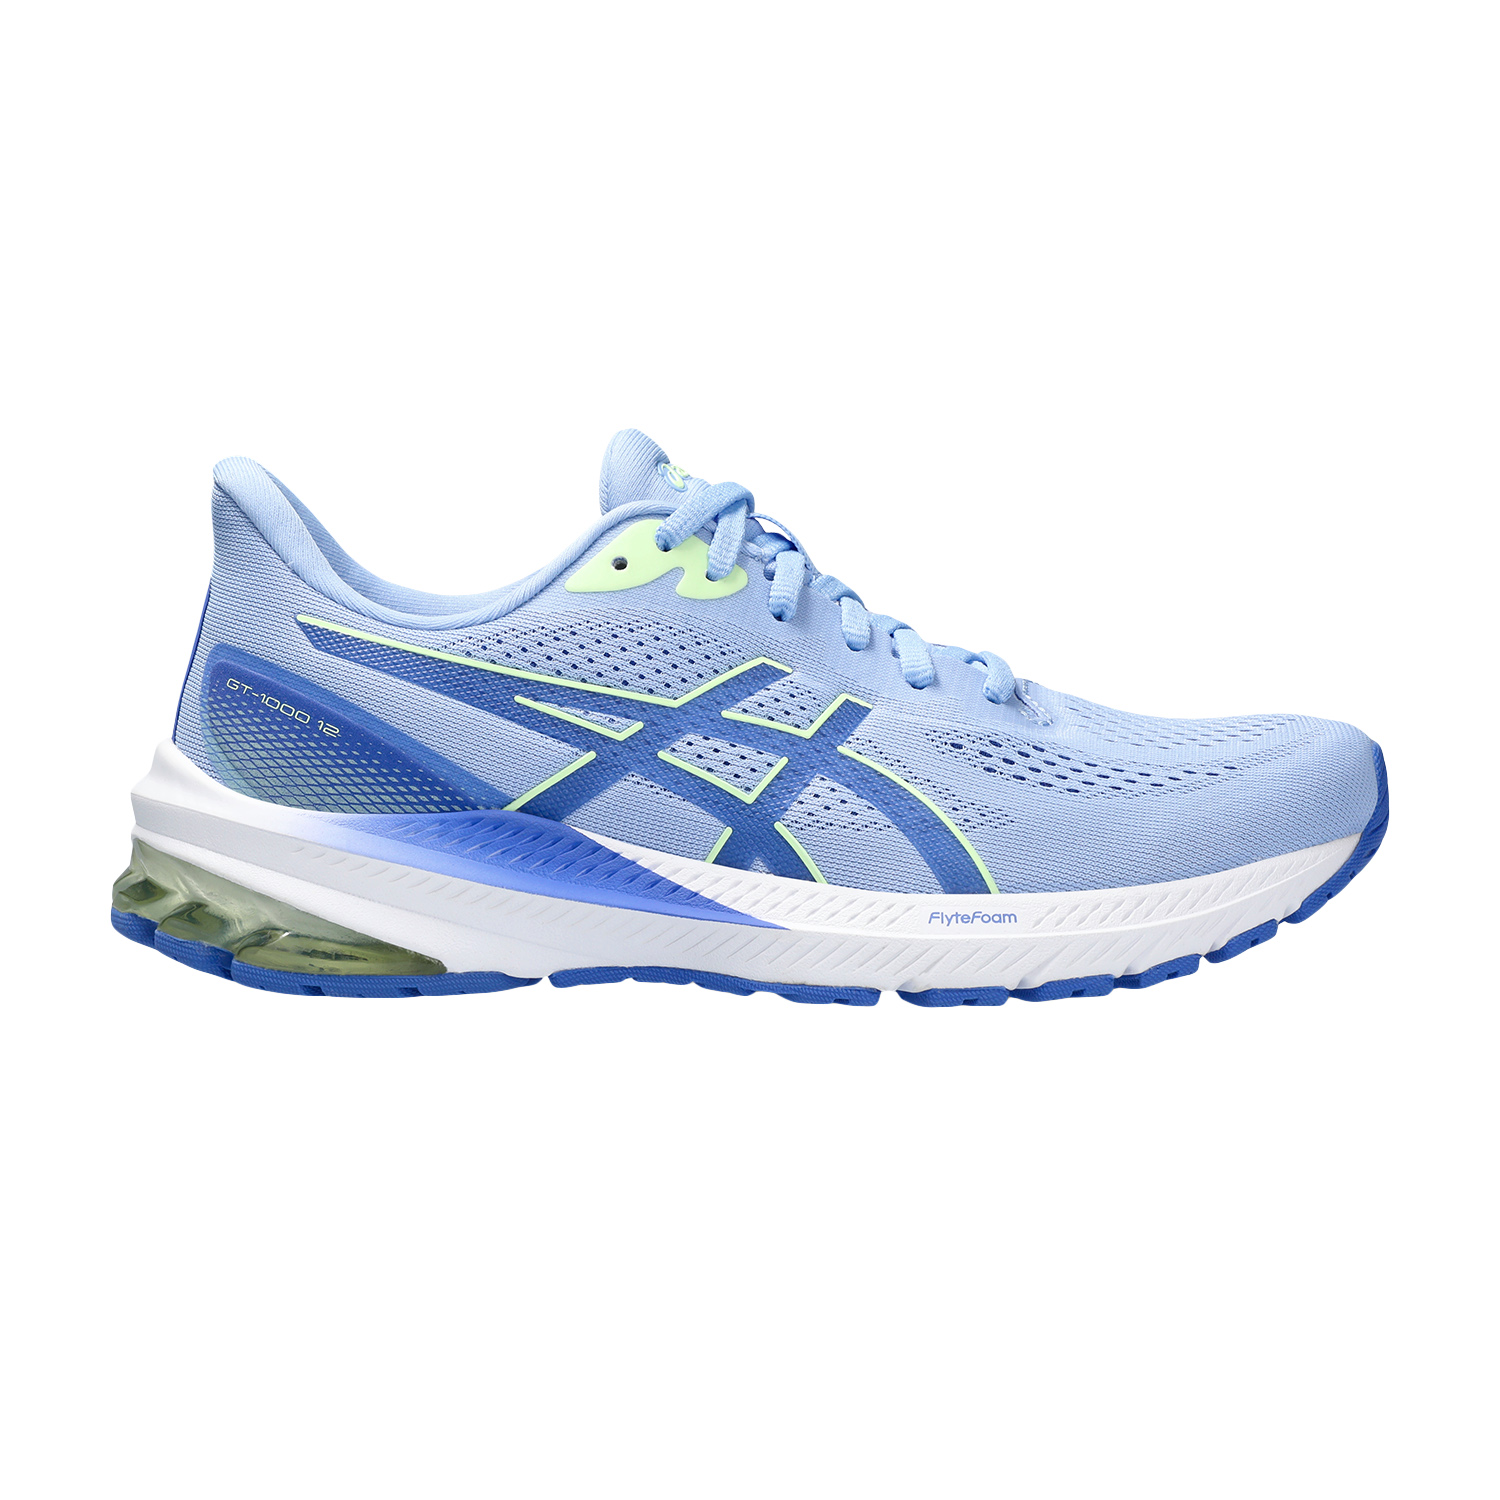 Womens ASICS Running Shoes & Clothes | SportsShoes.com